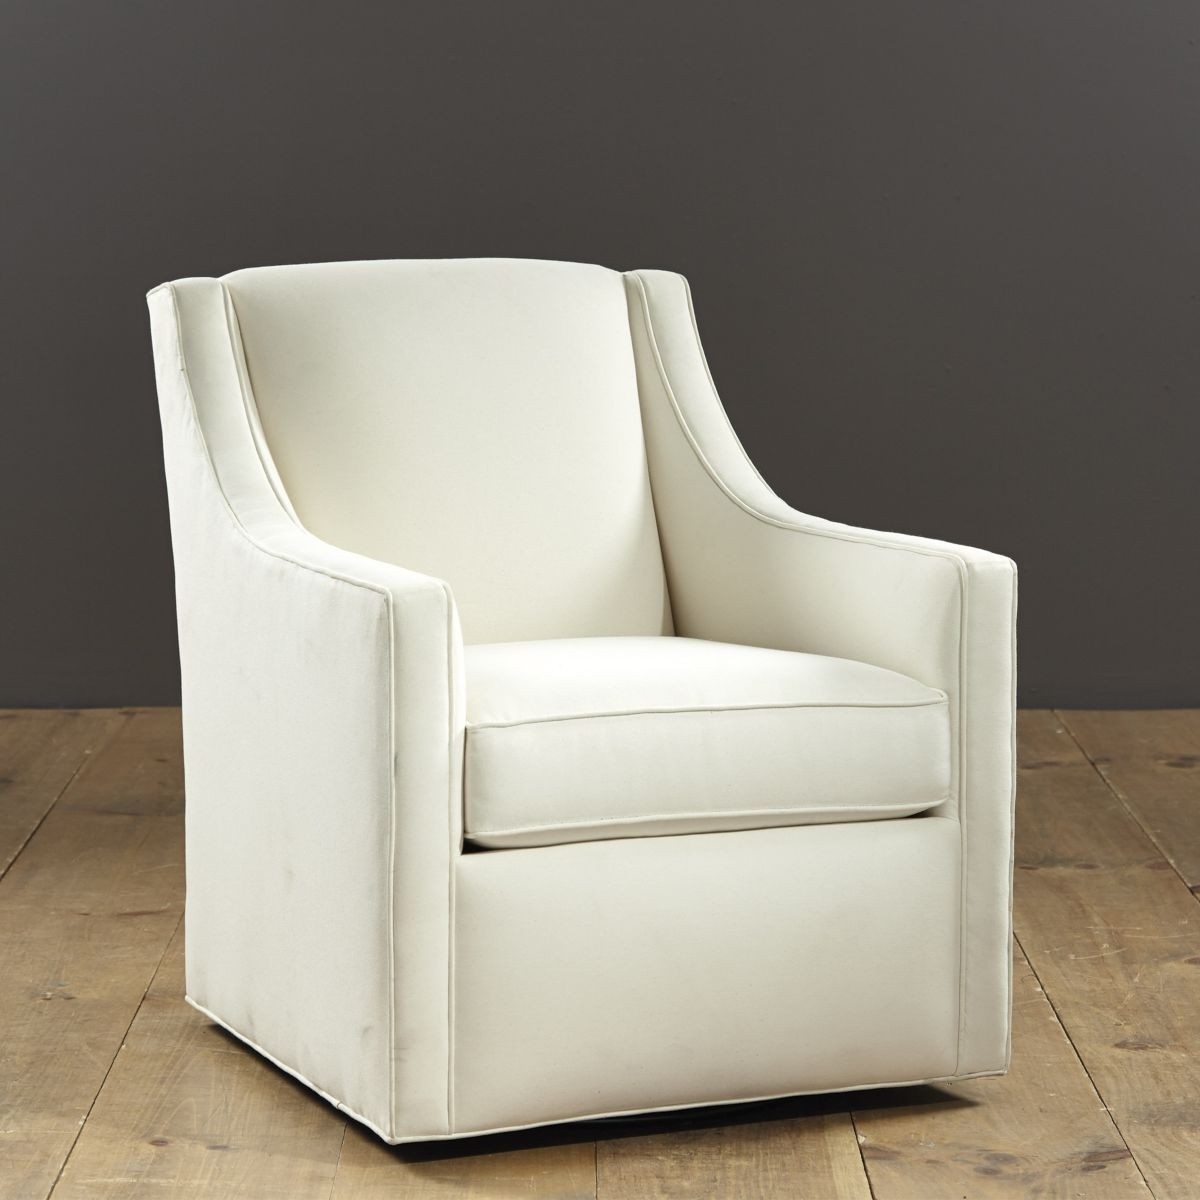 Carlyle swivel chair upholstered swivel chairs swivel